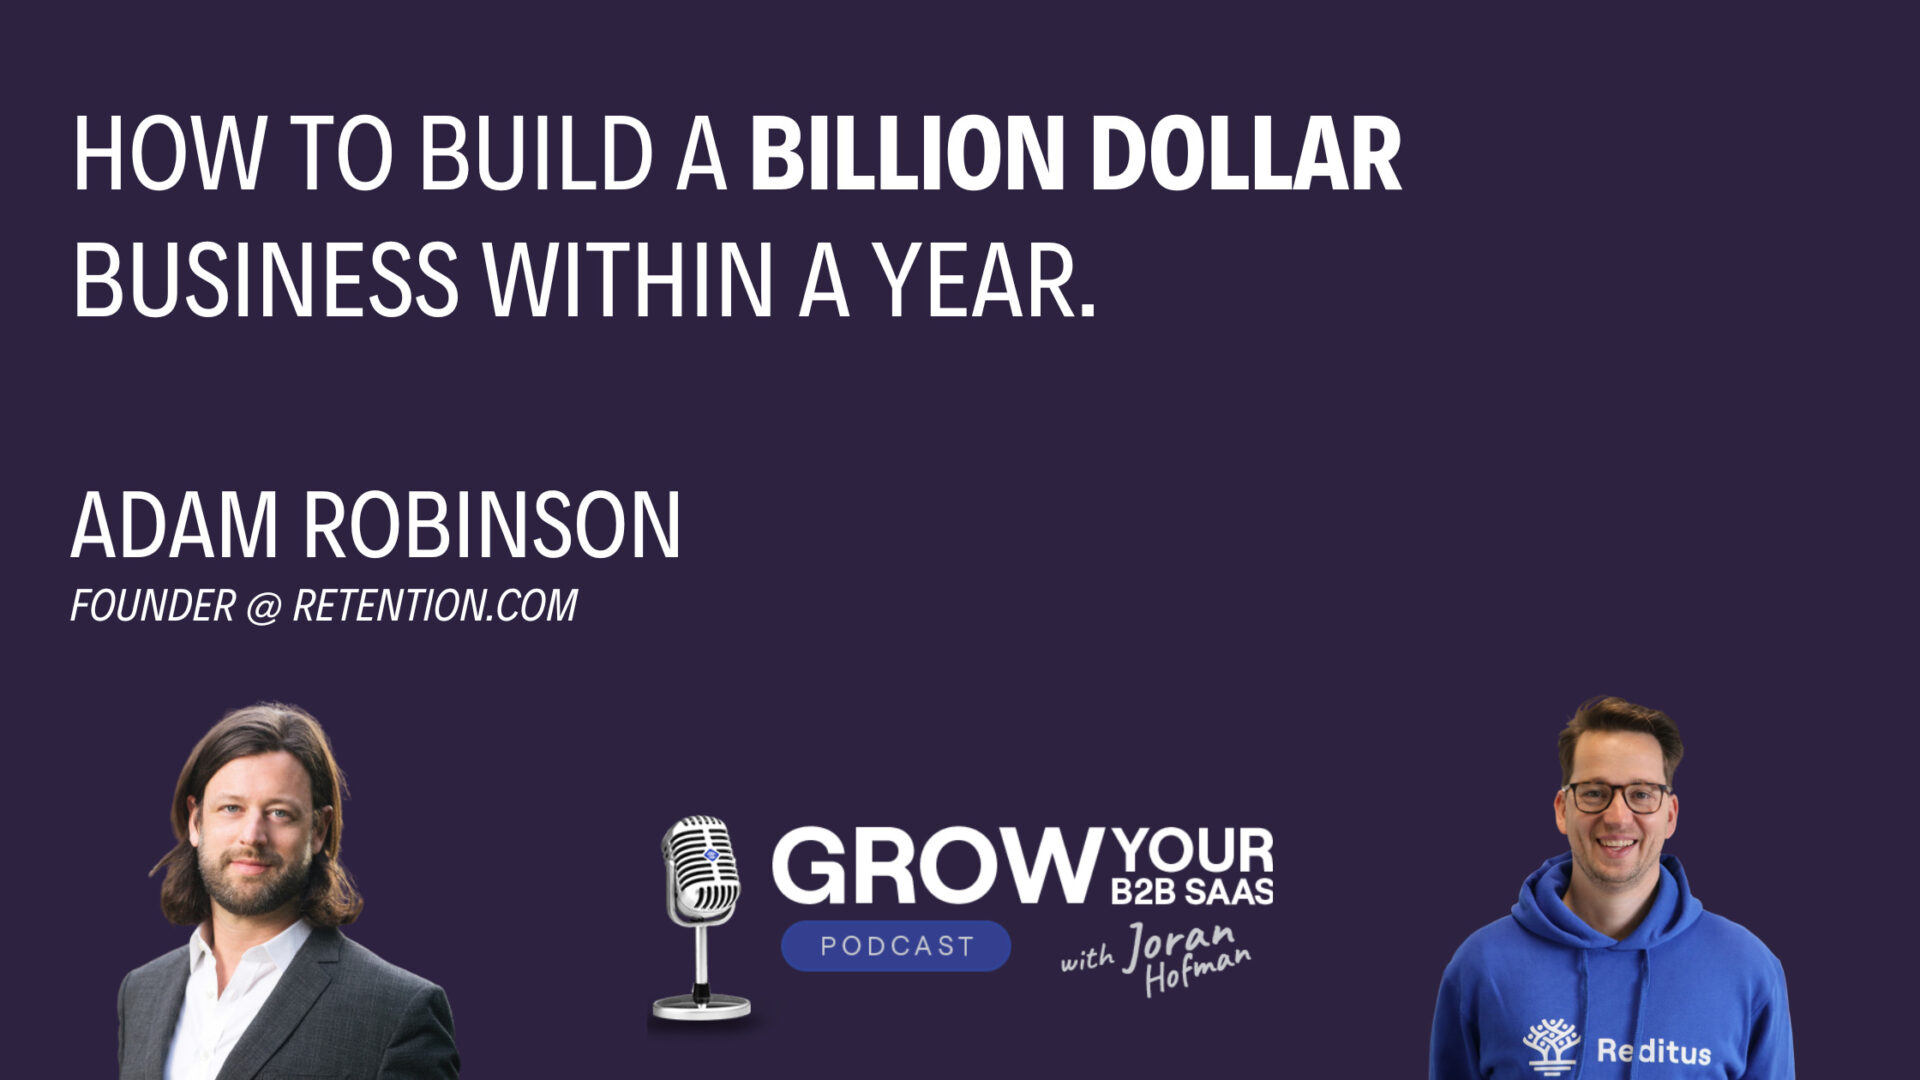 https://www.getreditus.com/podcast/s3e19-how-to-build-a-billion-dollar-business-within-a-year-with-adam-robinson/